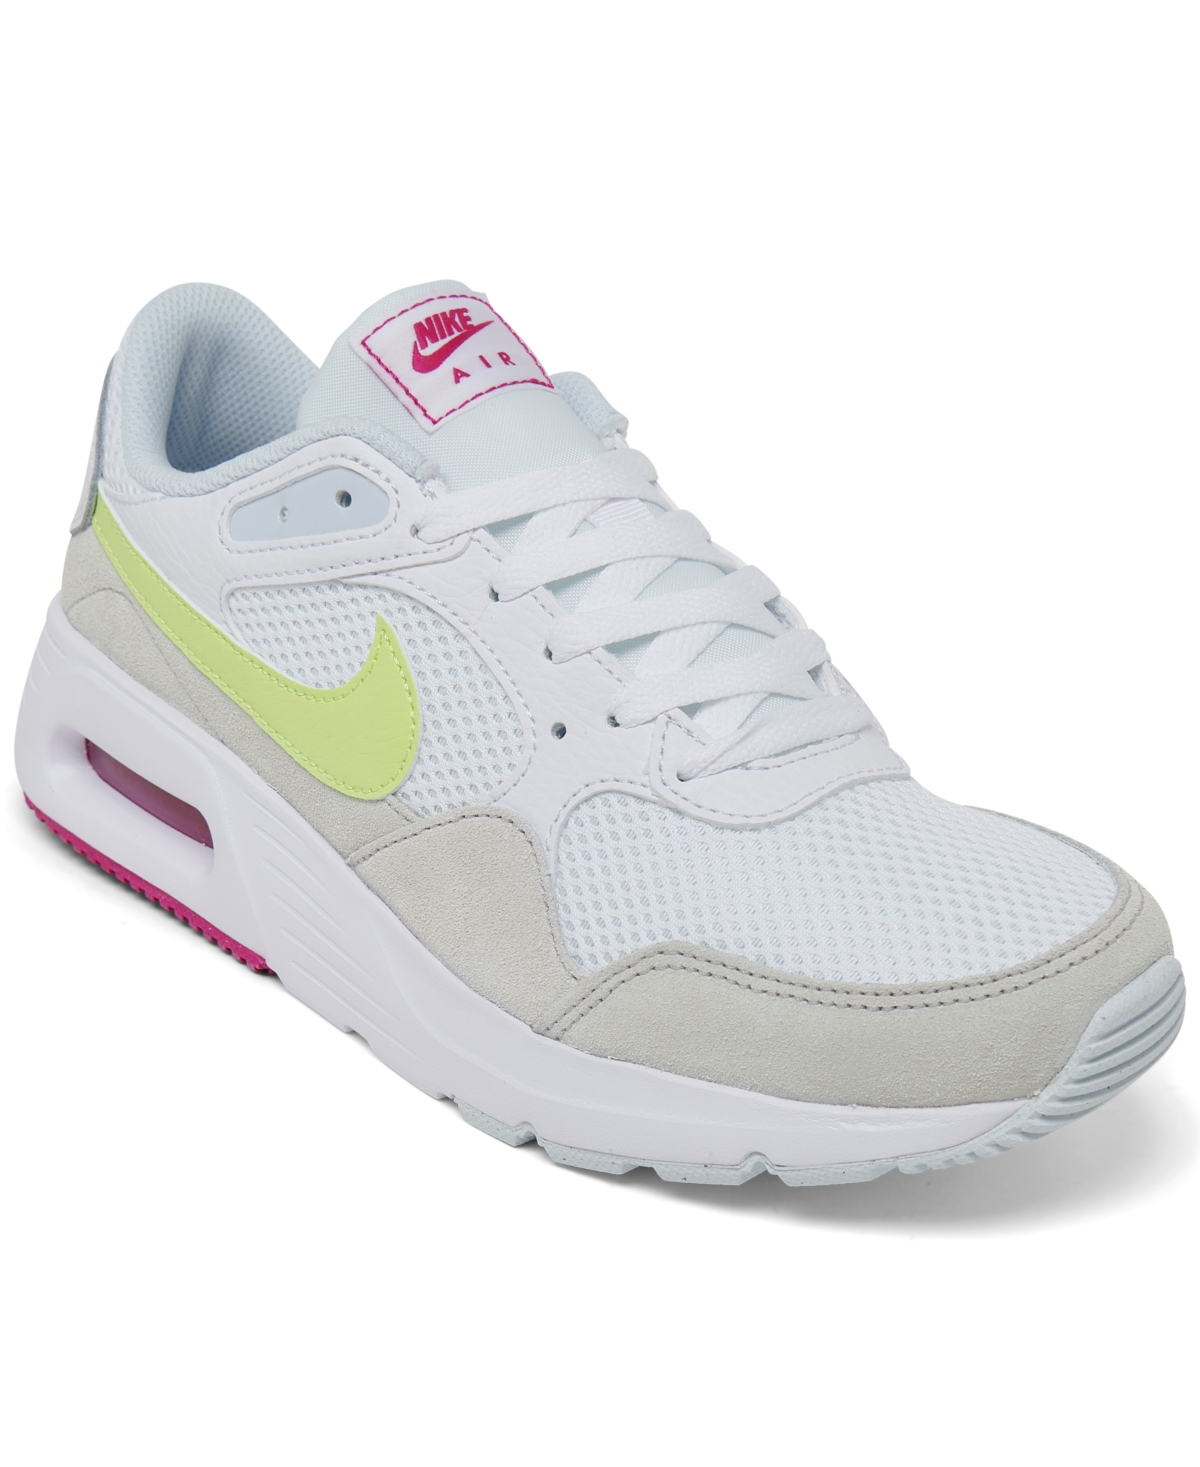 Nike Women's Air Max Sc Casual Sneakers From Finish Line In White,blue Tint